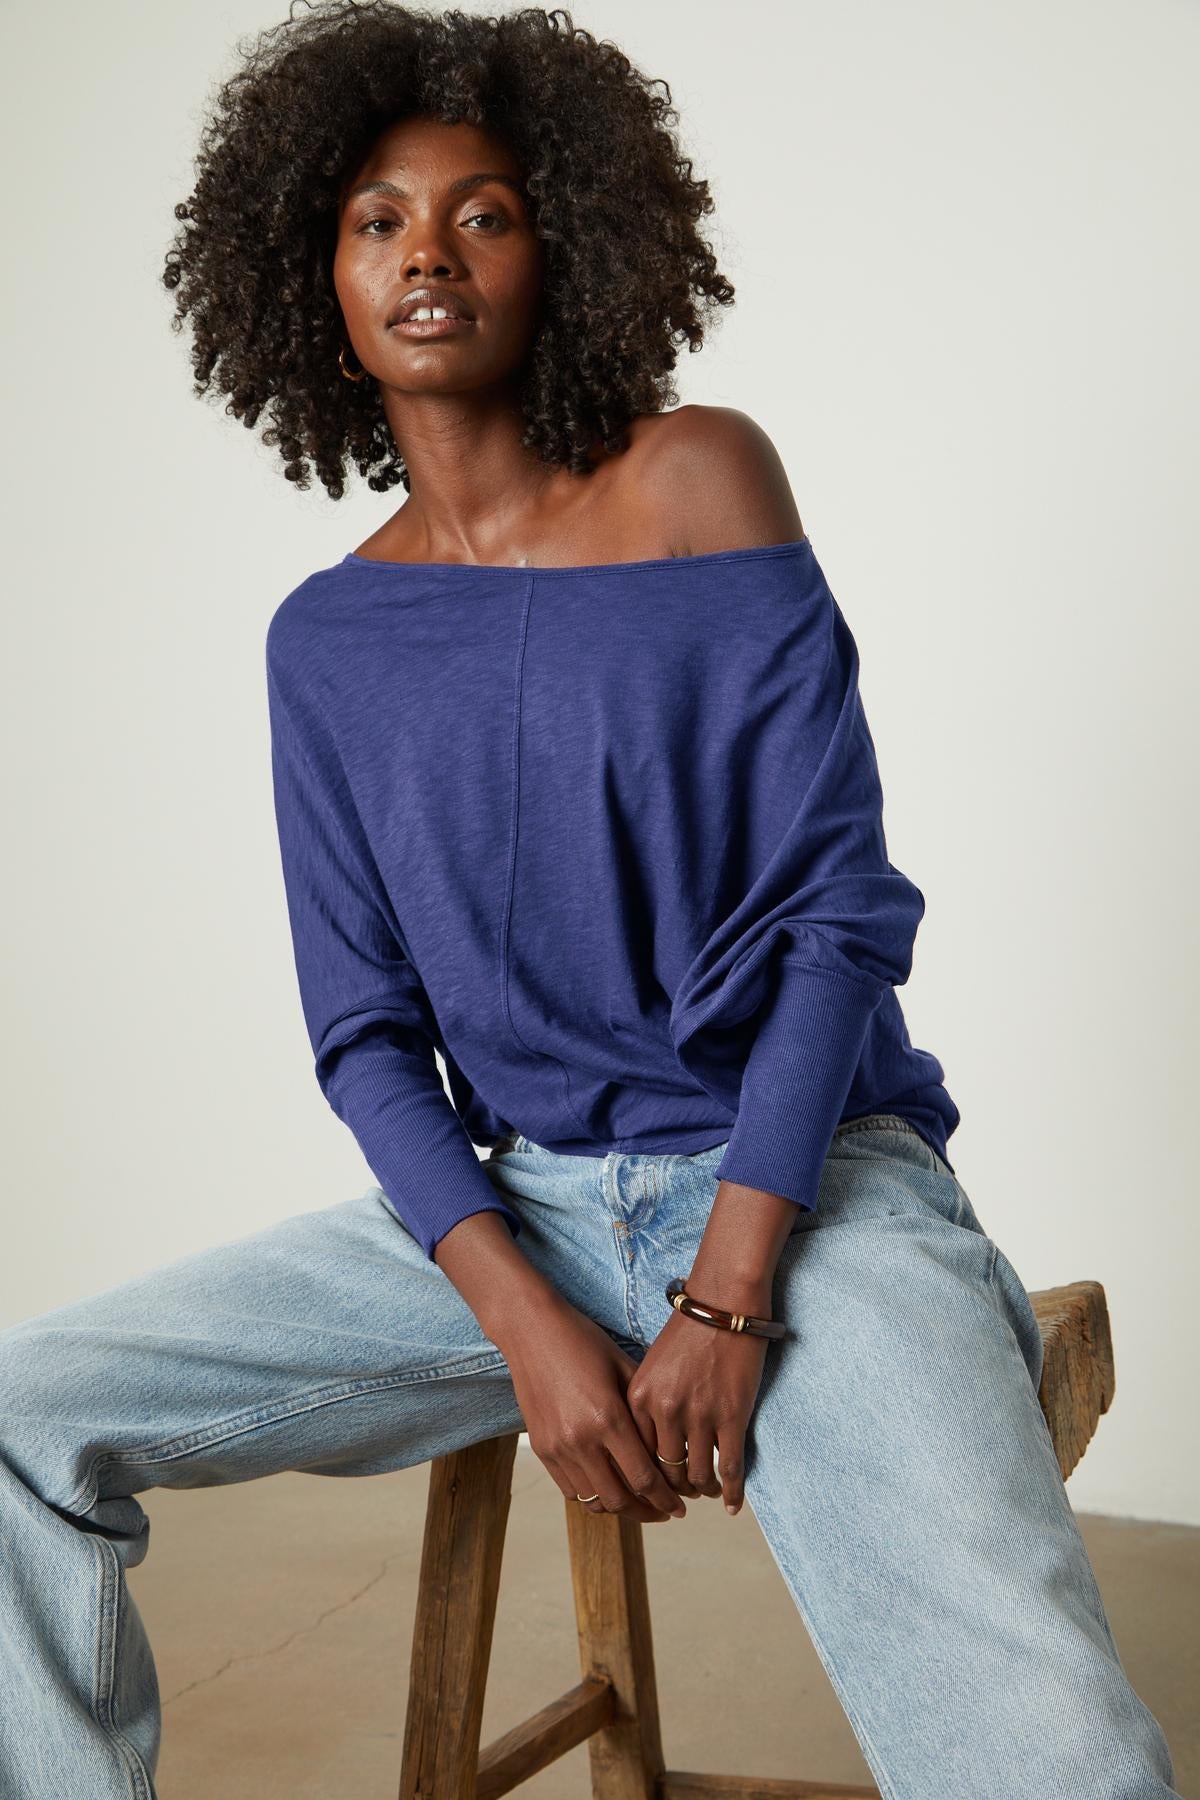   A woman is sitting on a stool wearing JOSS DOLMAN SLEEVE TEE by Velvet by Graham & Spencer jeans. 